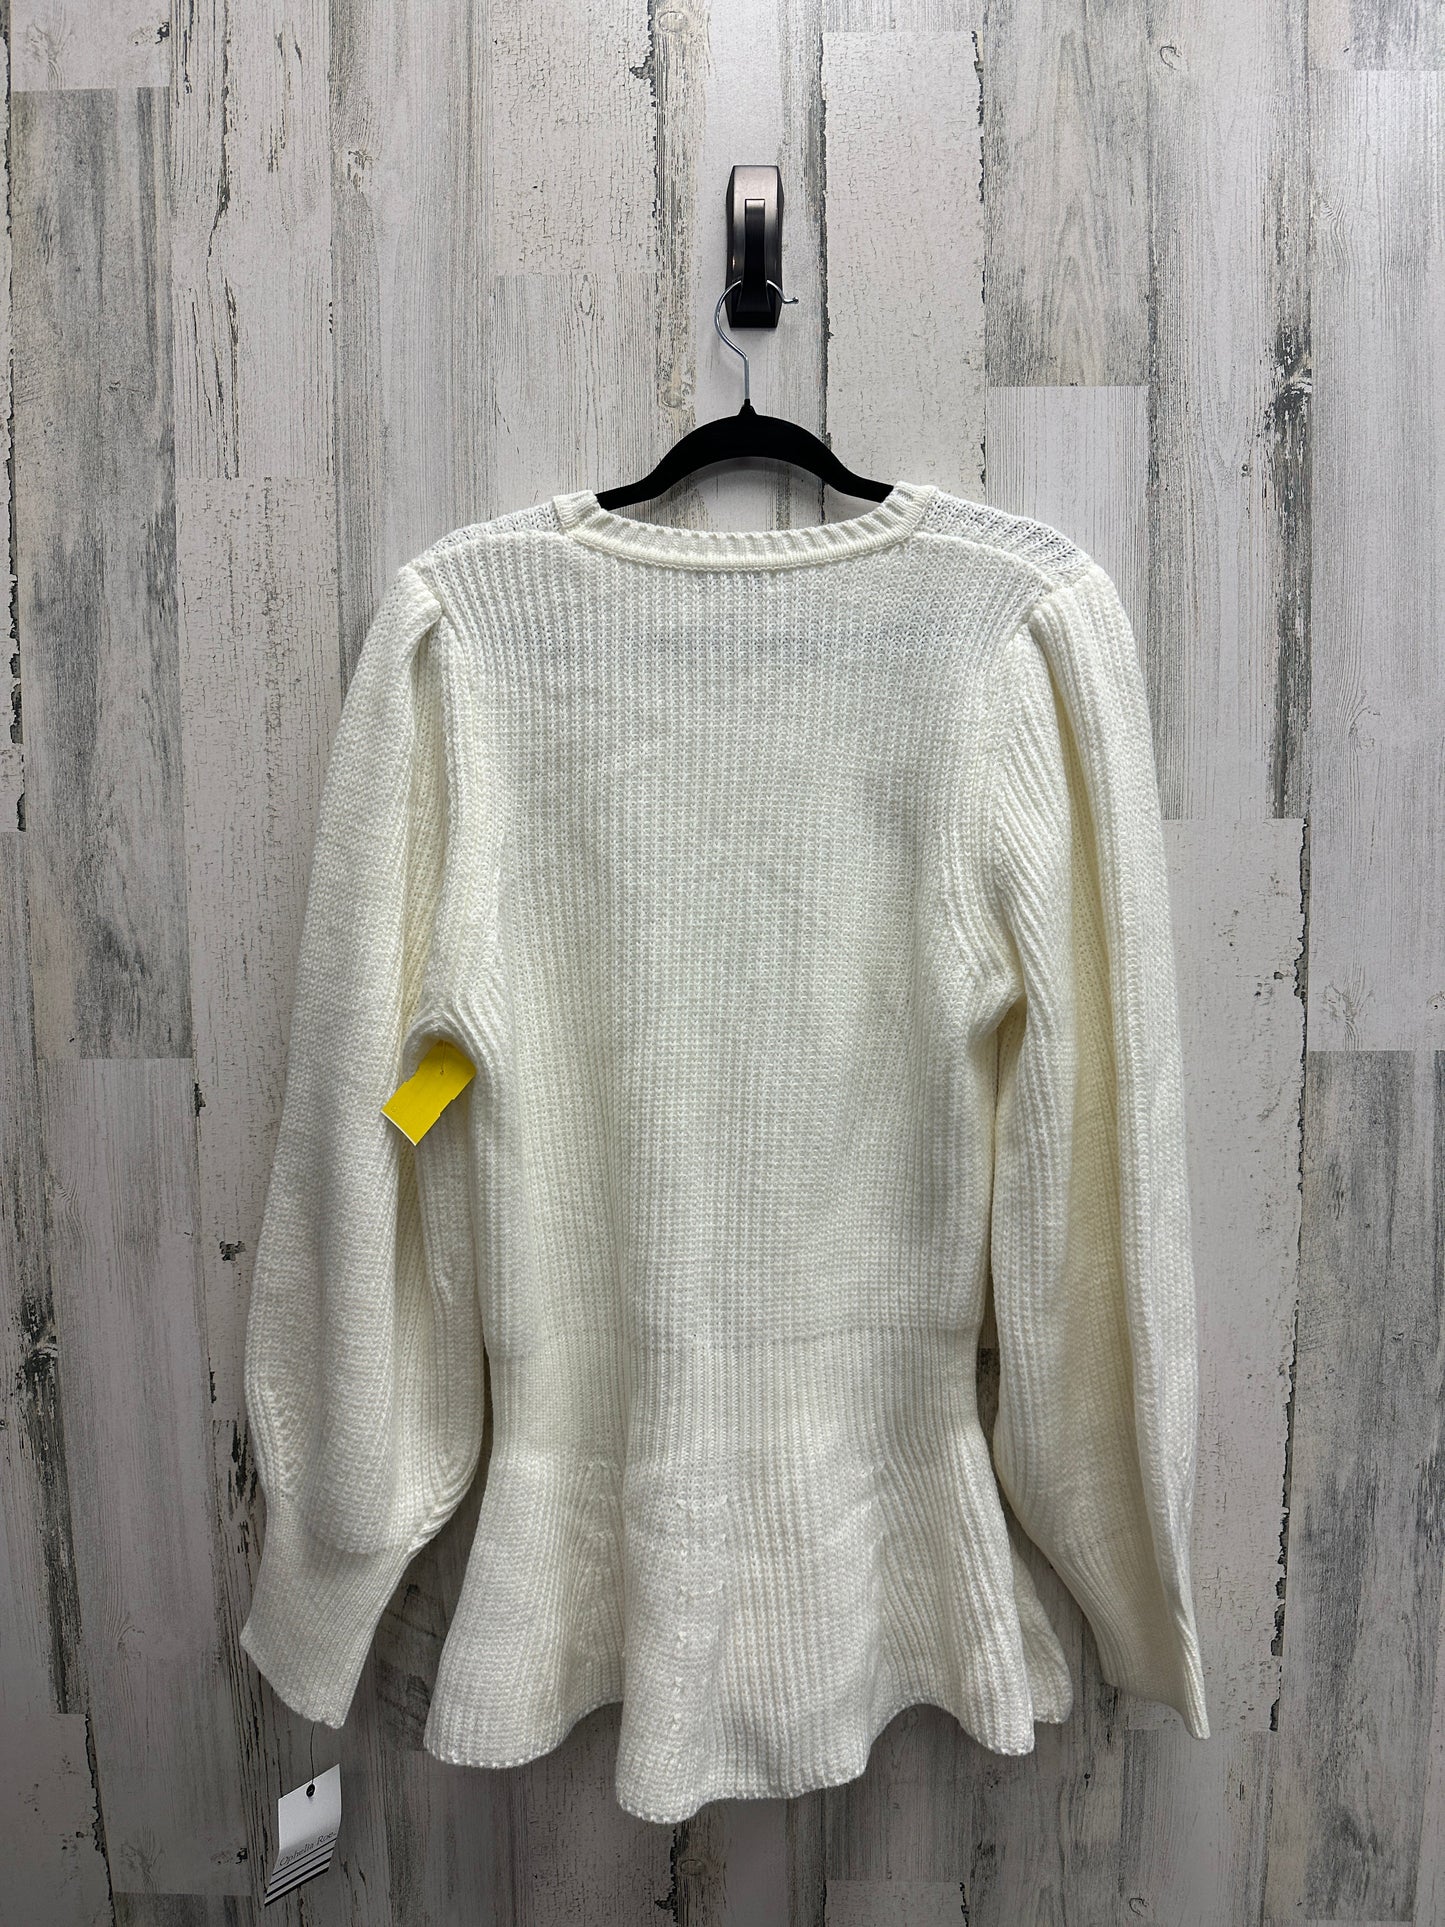 Sweater By Ophelia Roe  Size: 2x